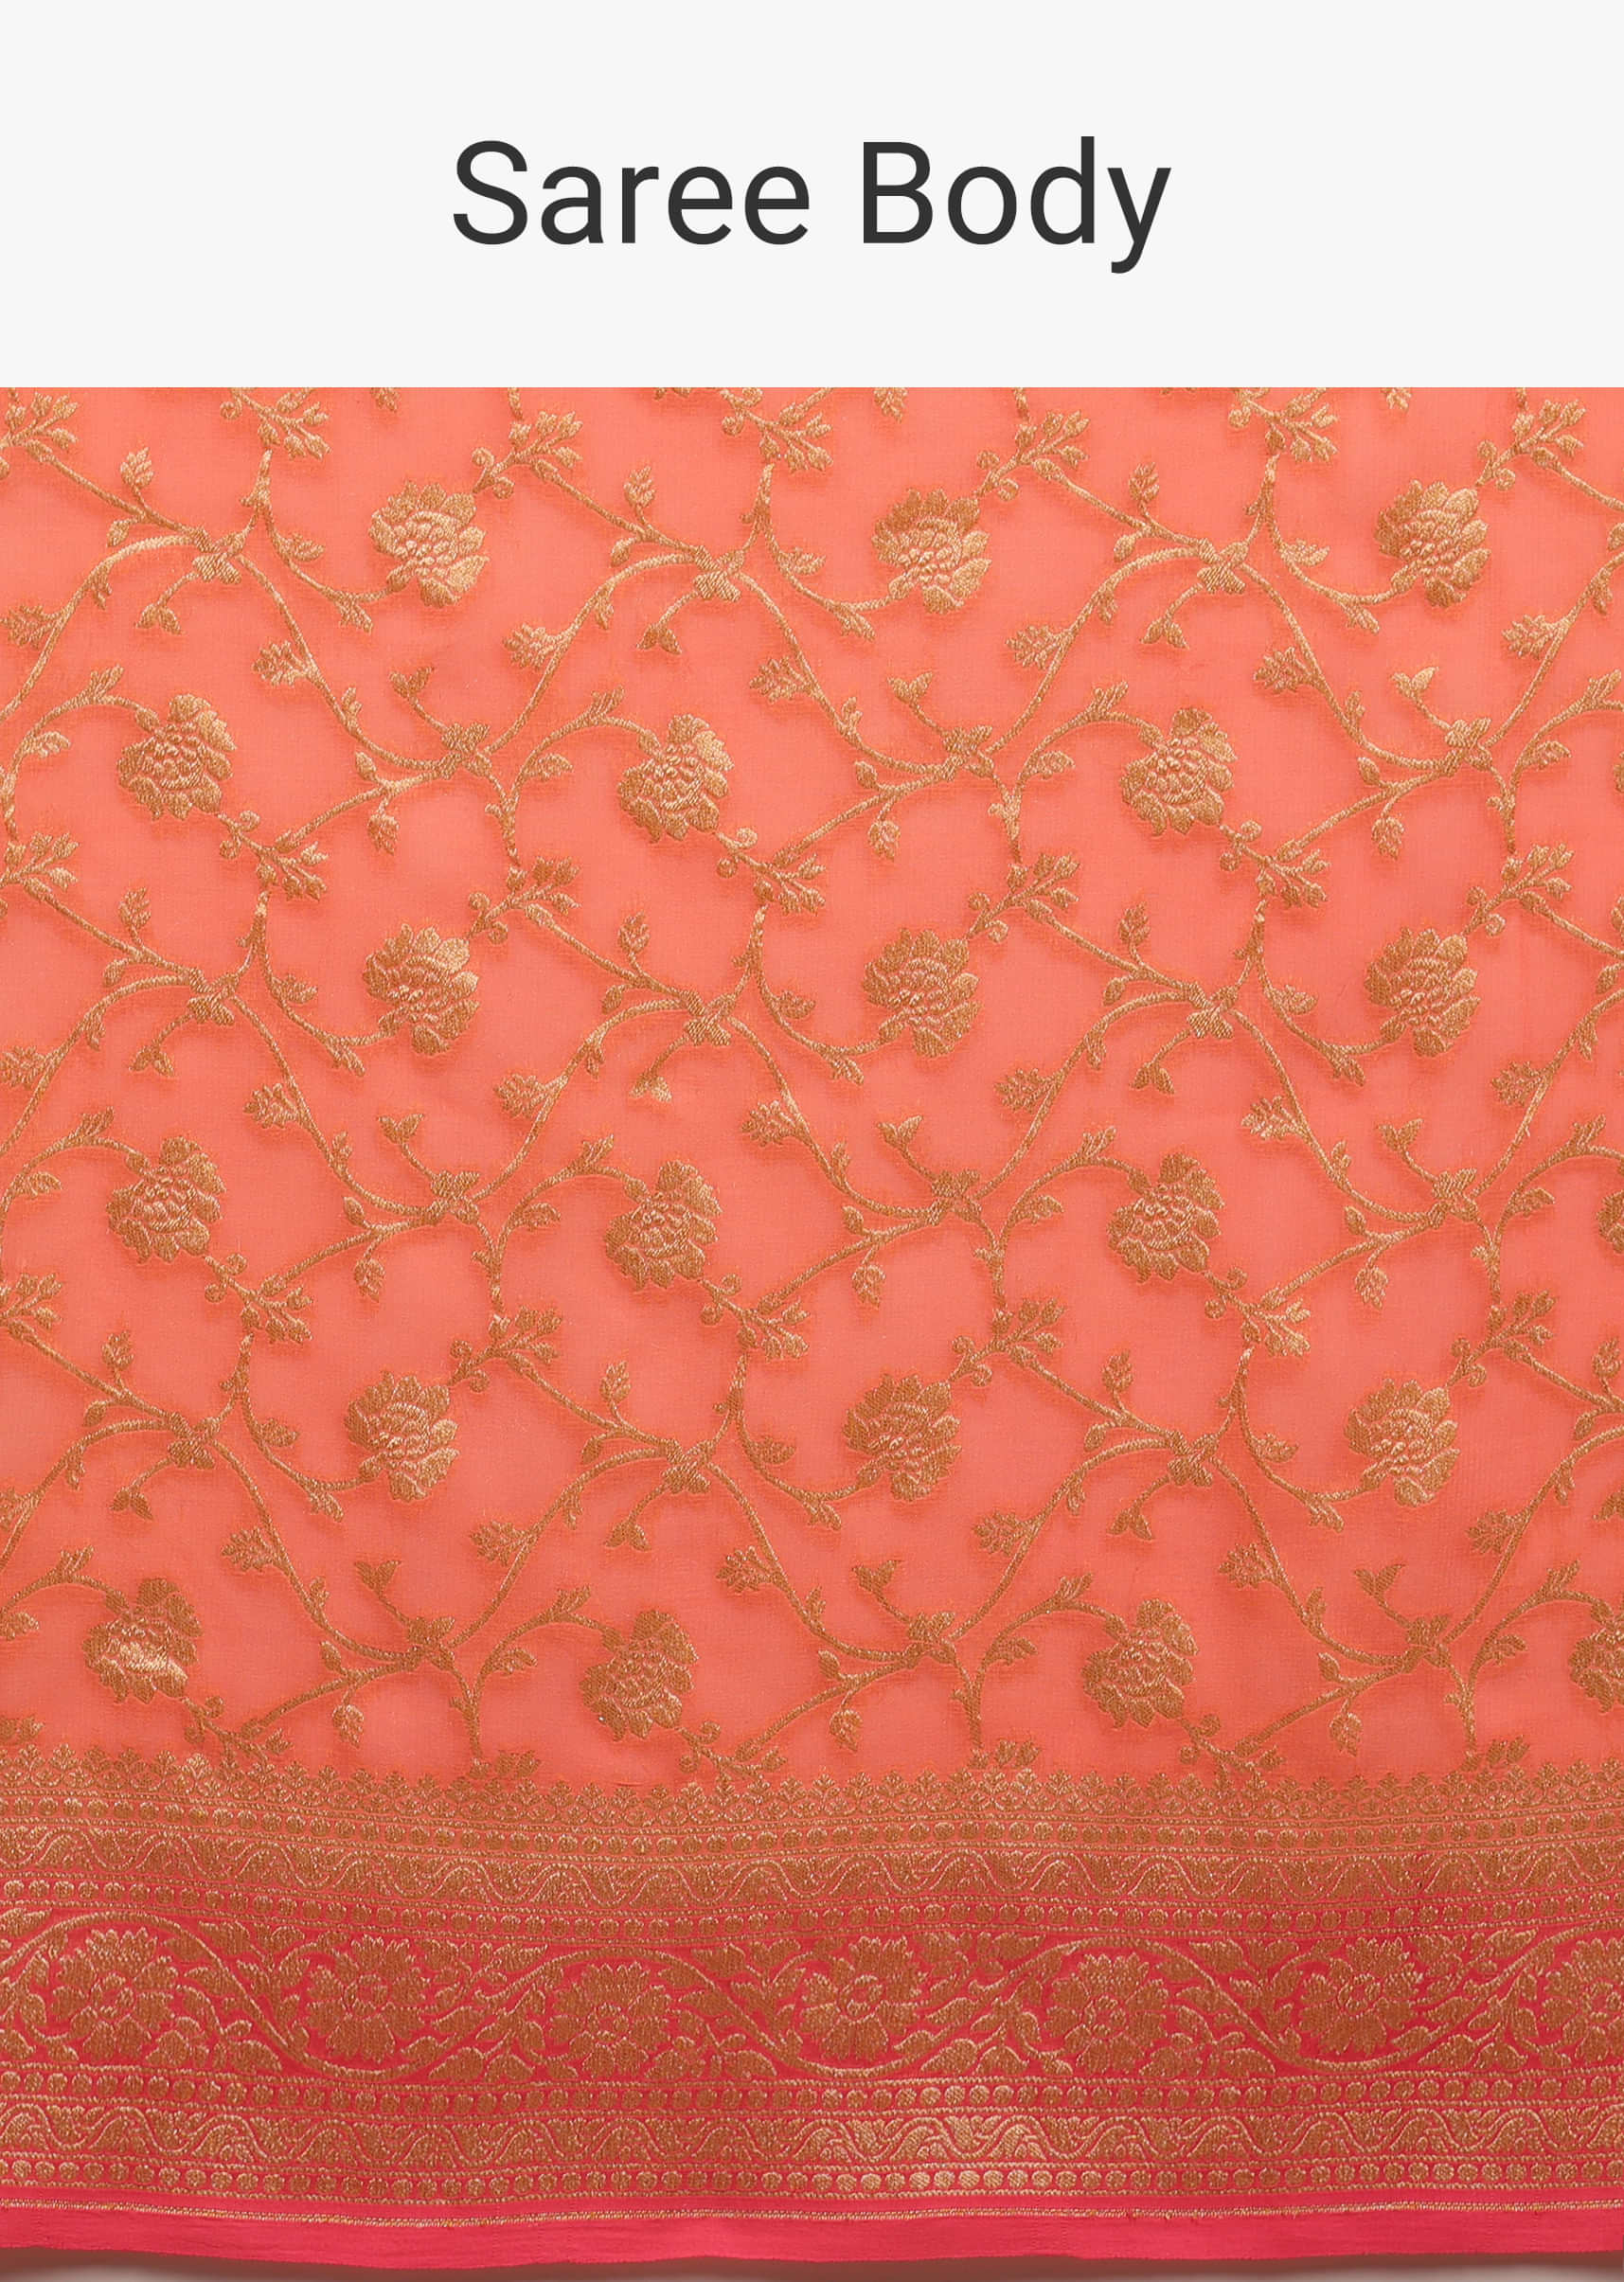 Coral Orange Traditional Saree In Georgette With Golden Floral Jaal Work